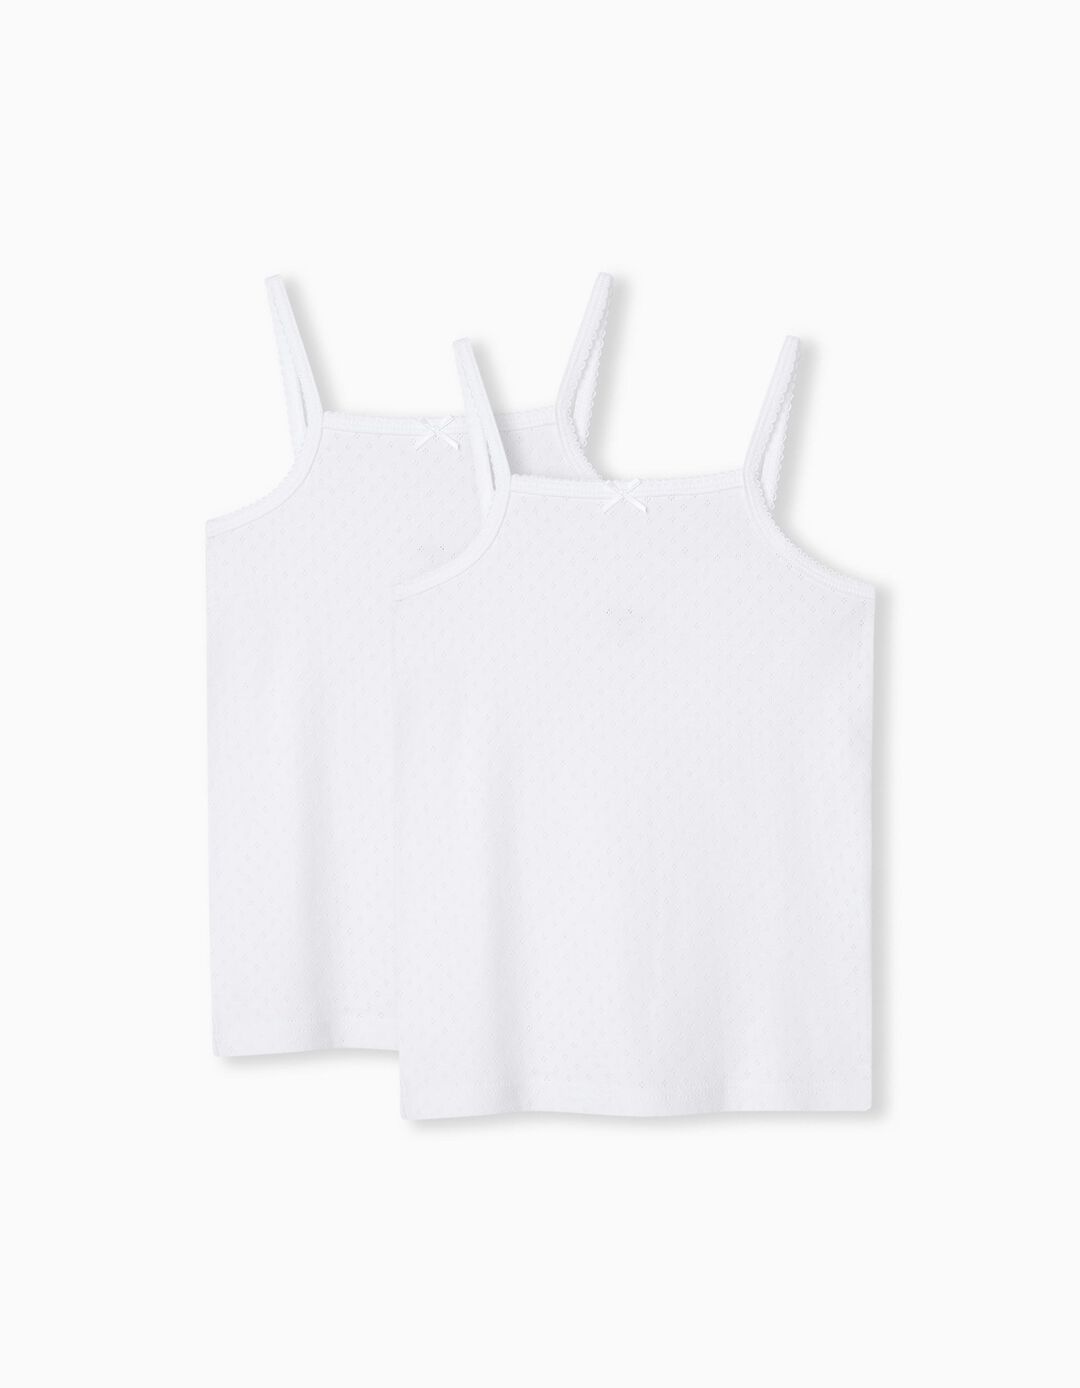 2 Microperfurated Tops Pack, Girls, White